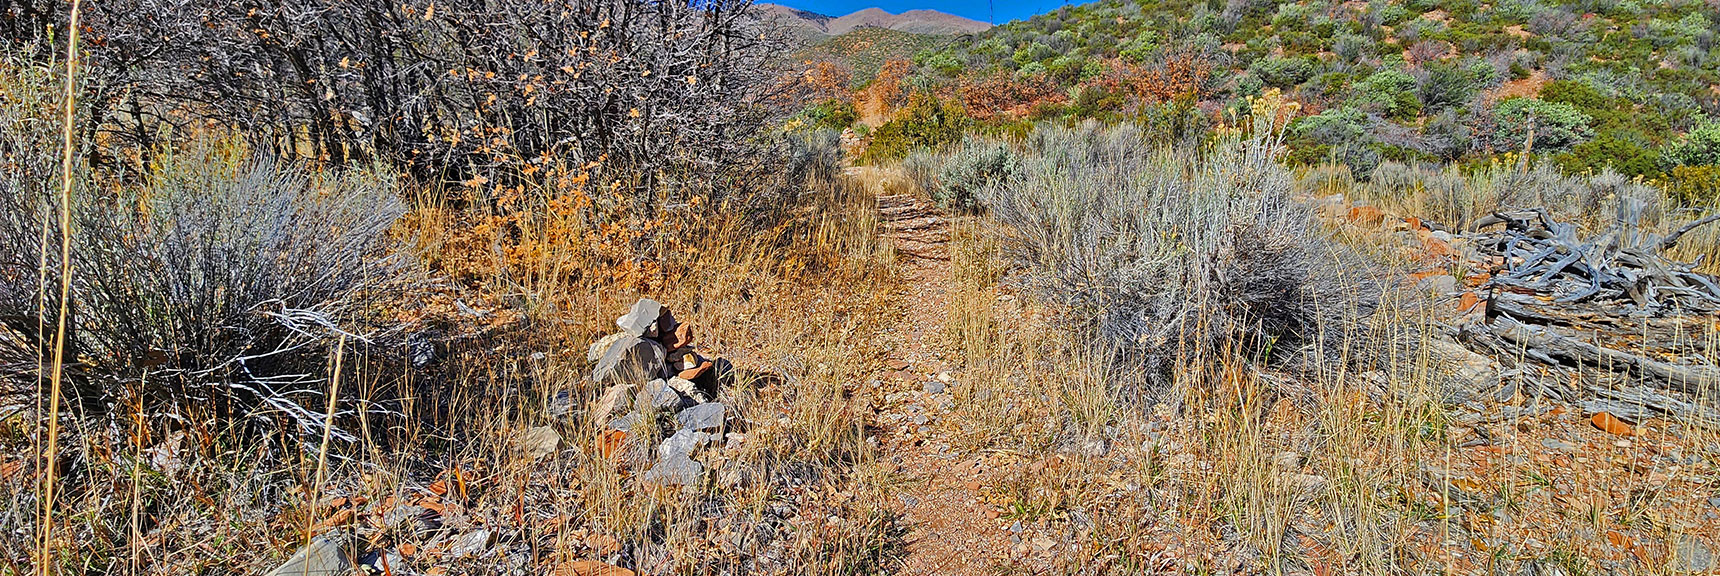 Following Cairns Through the Wash. Cairns Will Be Only Trail Guide When Brush Overgrown. | Schaefer Springs Loop Trail | Lovell Canyon, Nevada